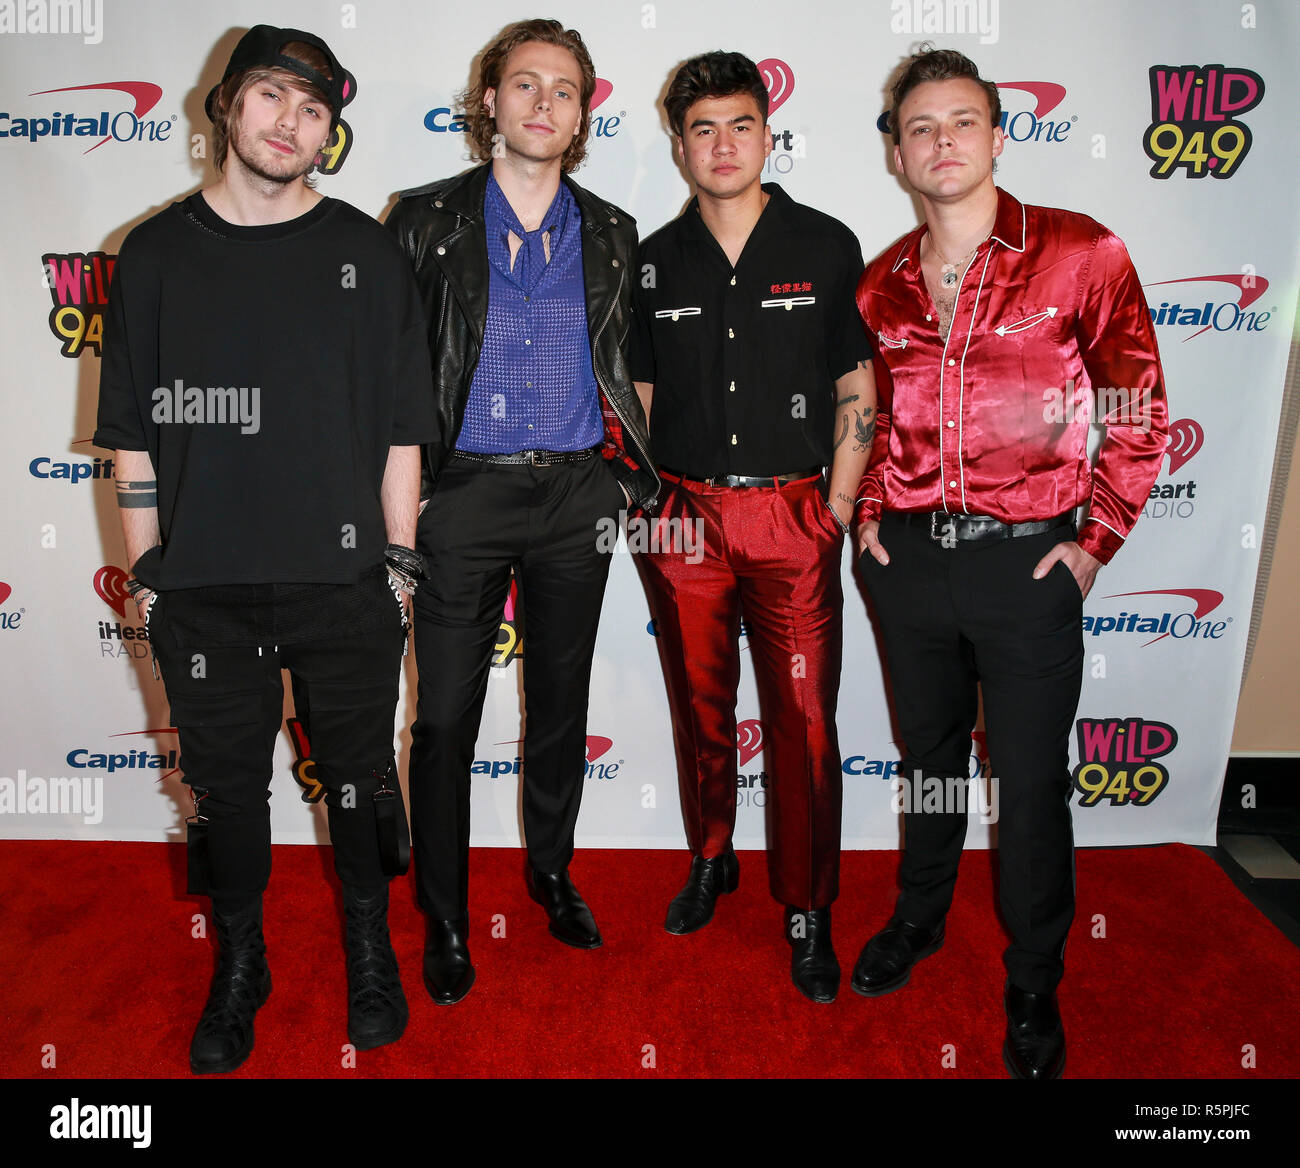 San Francisco, USA. 01st Dec, 2018. SAN FRANCISCO, CA - DEC 01: (L-R) Michael Clifford, Luke Hemmings, Calum Hood, and Ashton Irwin of 5 Seconds of Summer attend WiLD 94.9's FM's Jingle Ball 2018 Presented by Capital One at the Bill Graham Civic Auditorium on December 1, 2018 in San Francisco, California Credit: The Photo Access/Alamy Live News Stock Photo